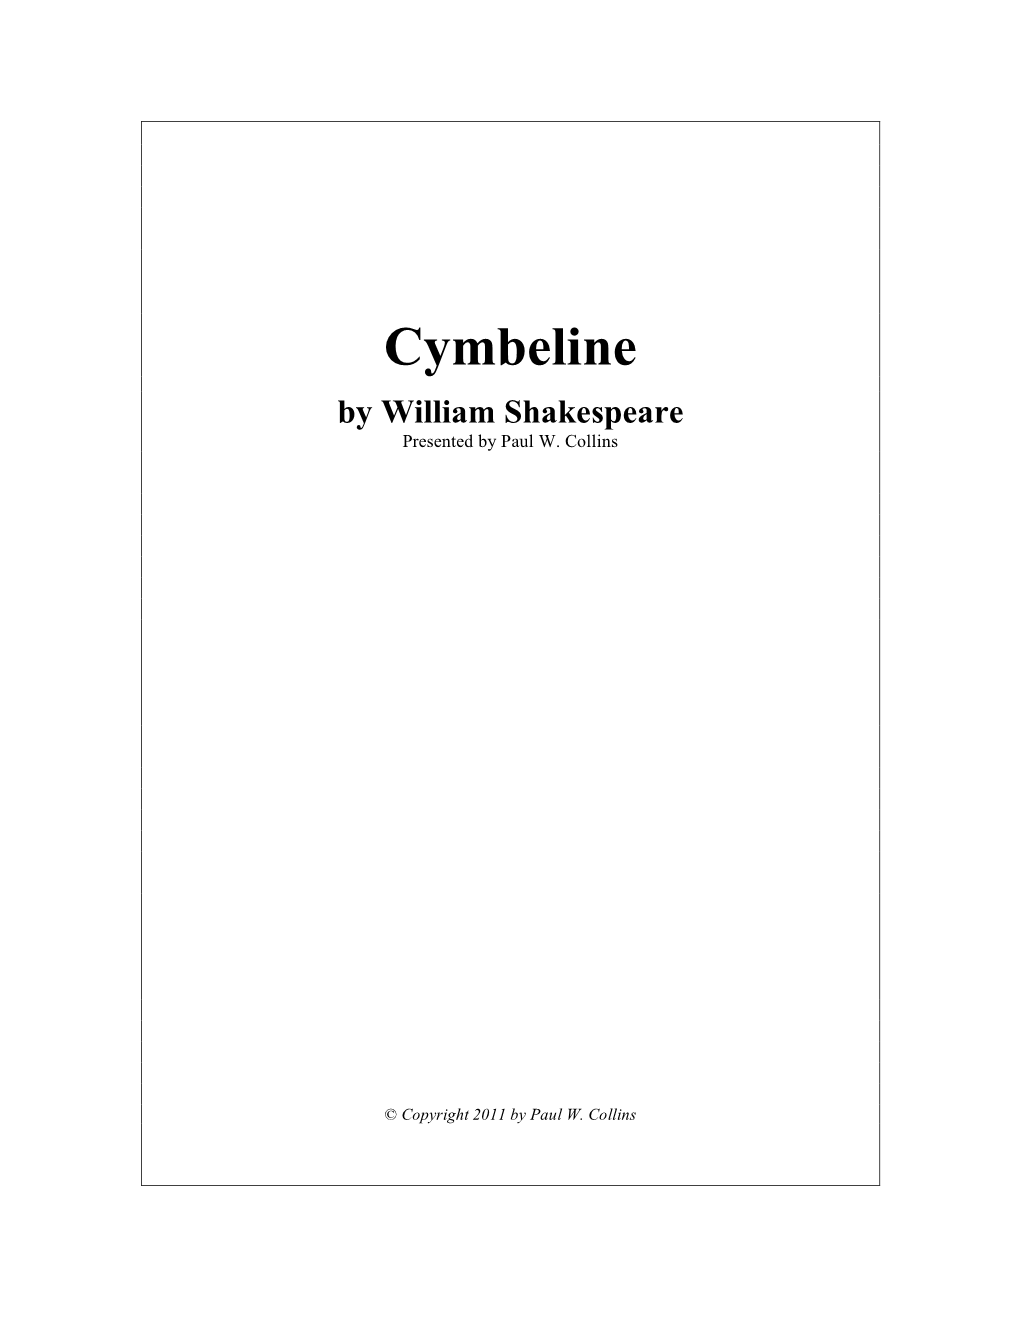 Cymbeline by William Shakespeare Presented by Paul W